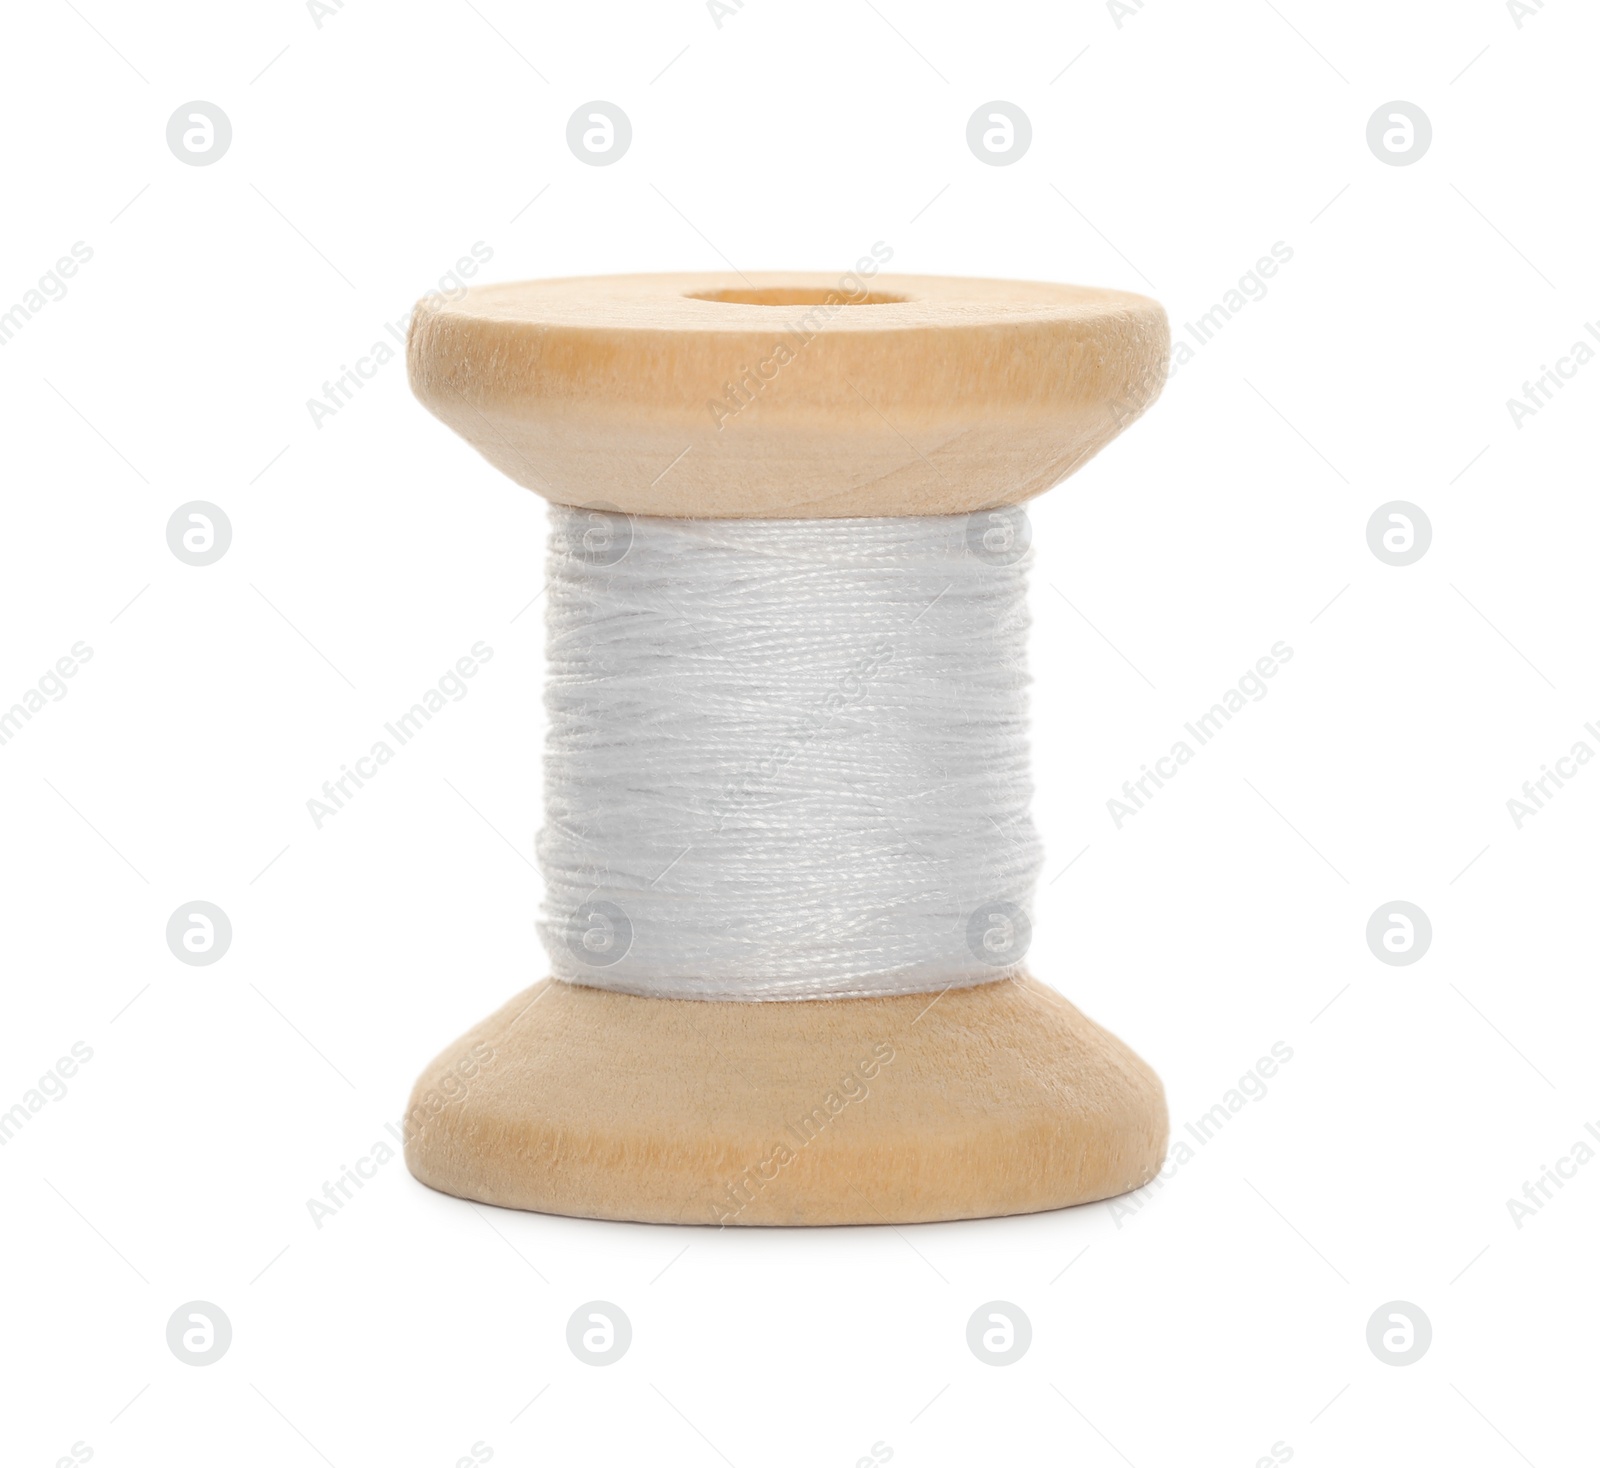 Photo of Wooden spool of sewing thread isolated on white